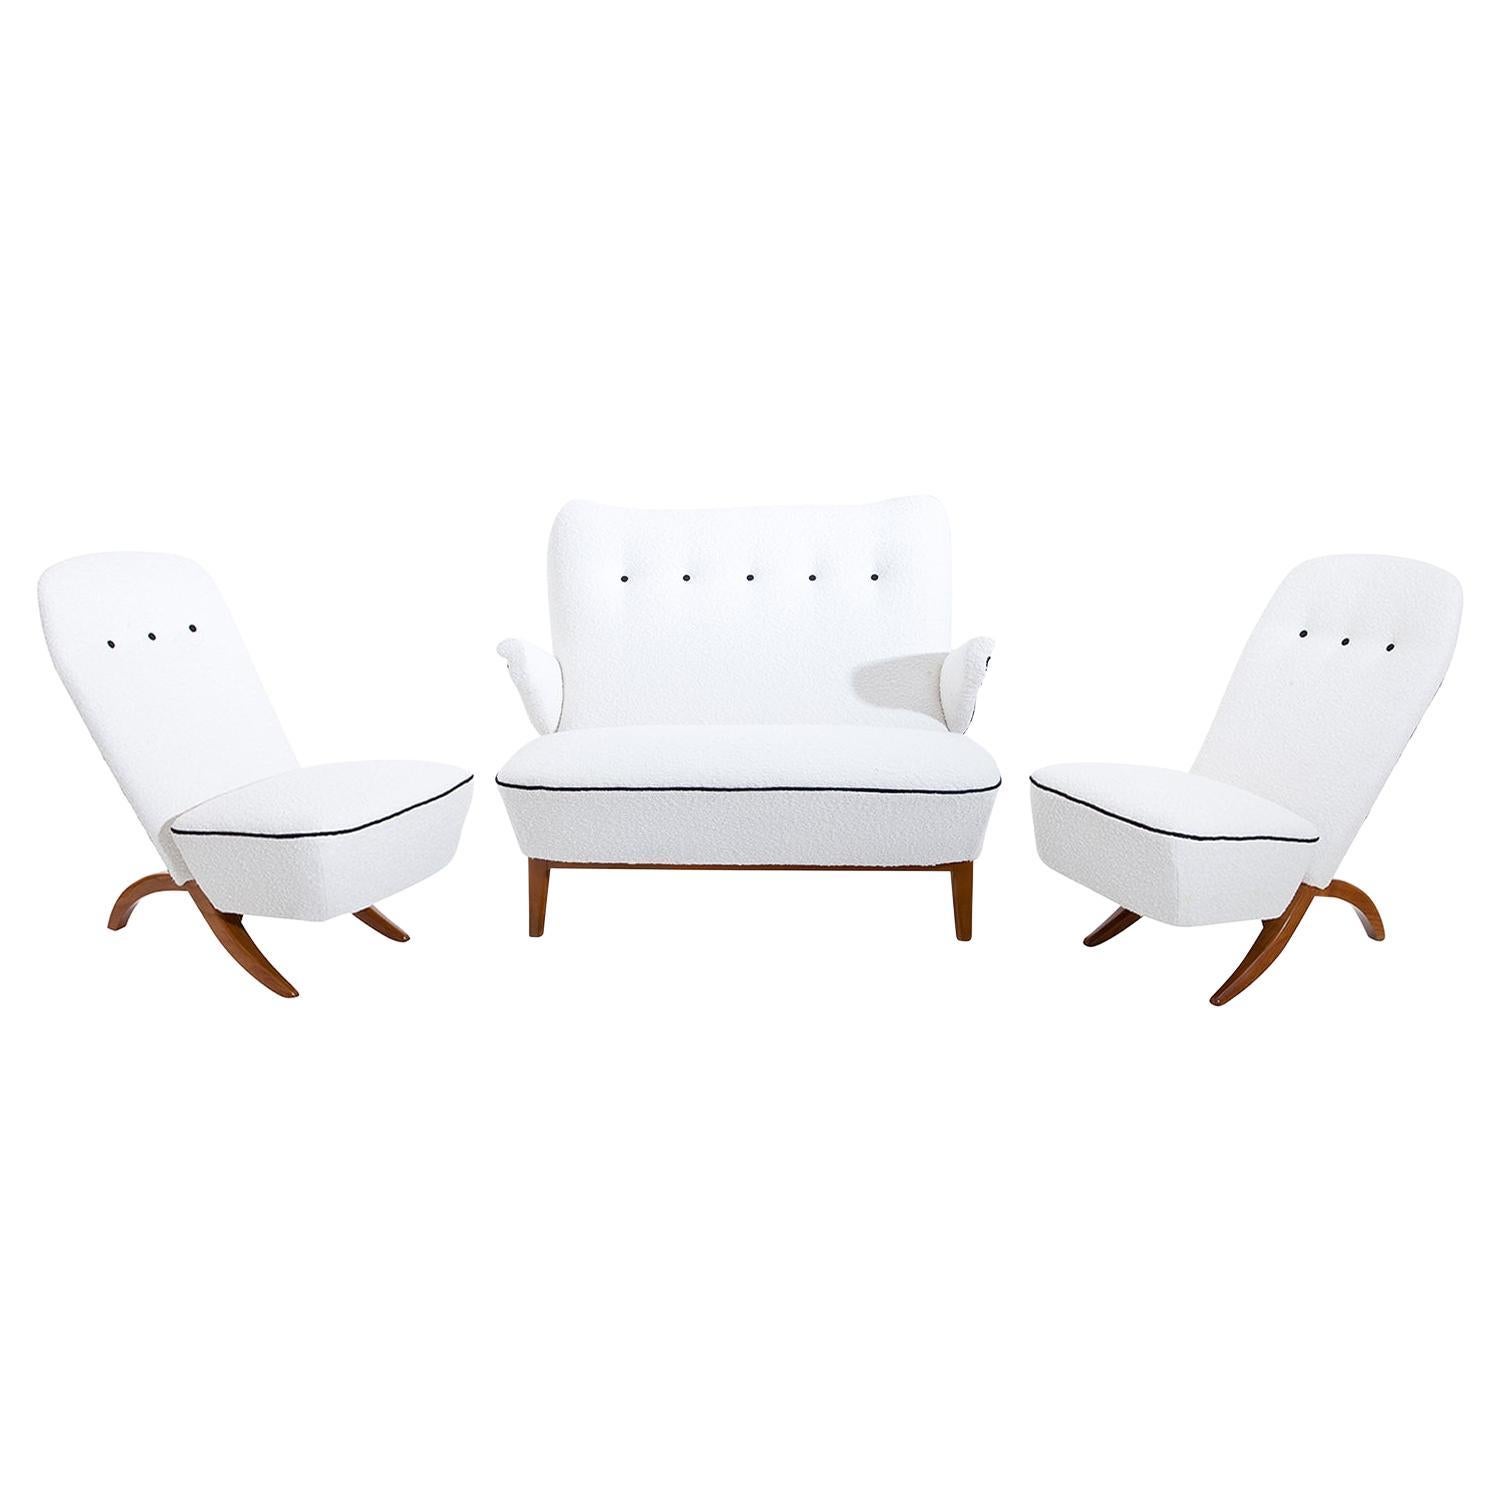 20th Century Dutch Artifort Set of a Congo Sofa & Slipper Chairs by Theo Ruth For Sale